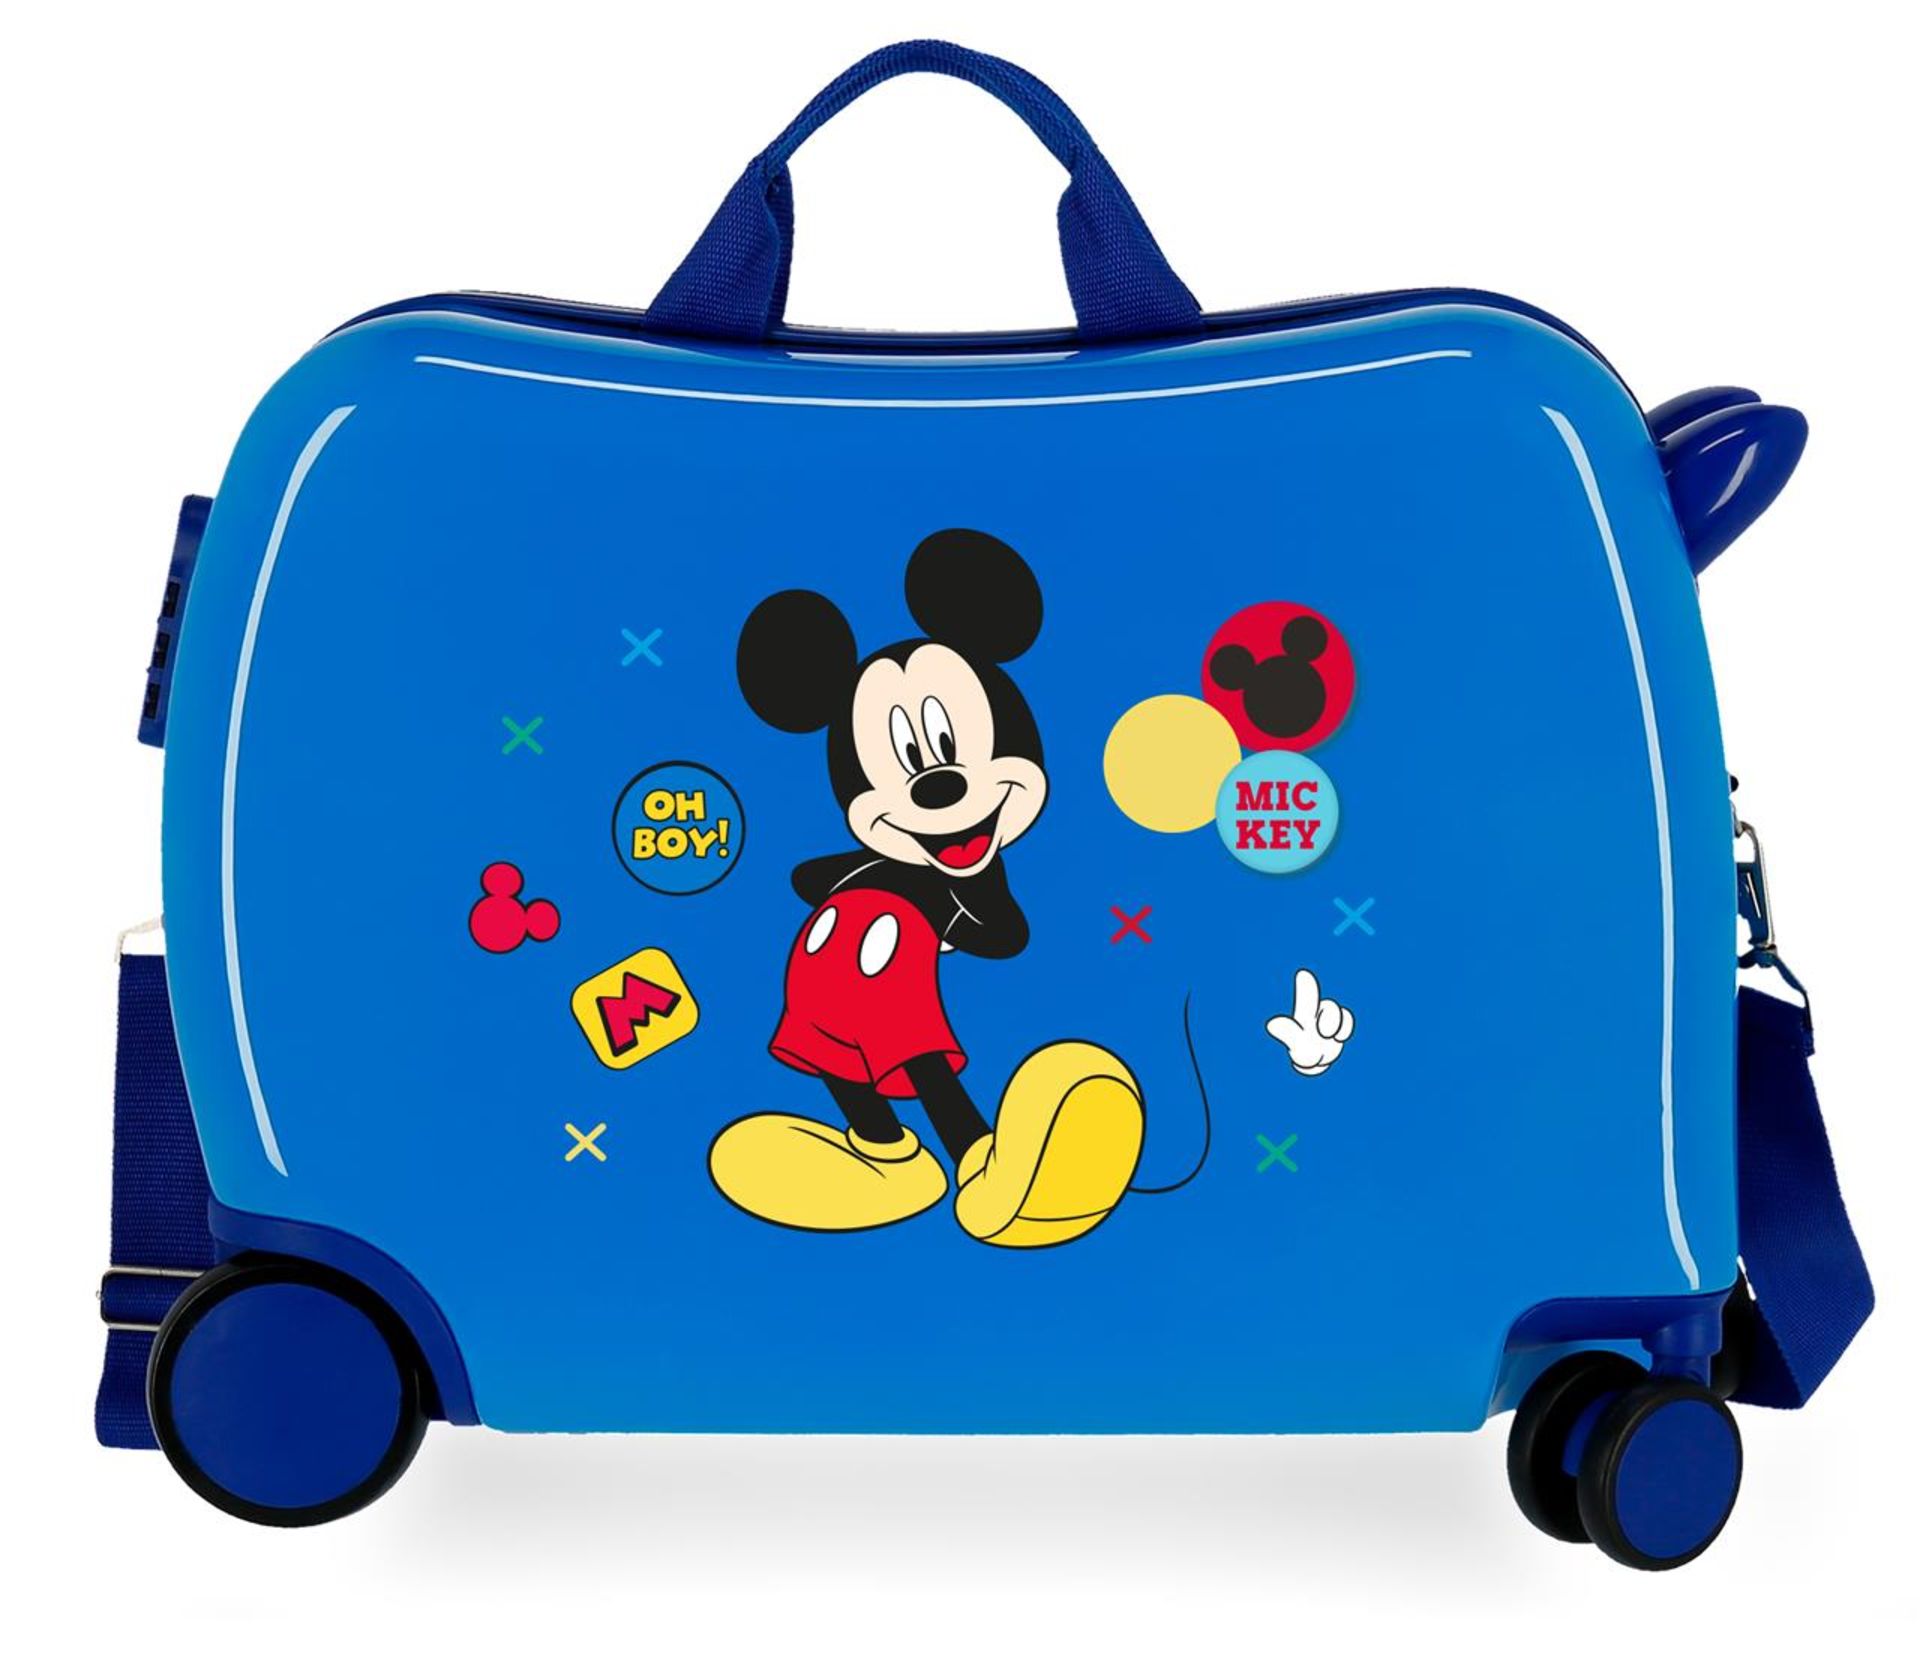 Pallet Of 48 Joumma Bags Rolling Suitcases In Various Disney Designs And Colours 50X38X20 Cm - Image 92 of 102